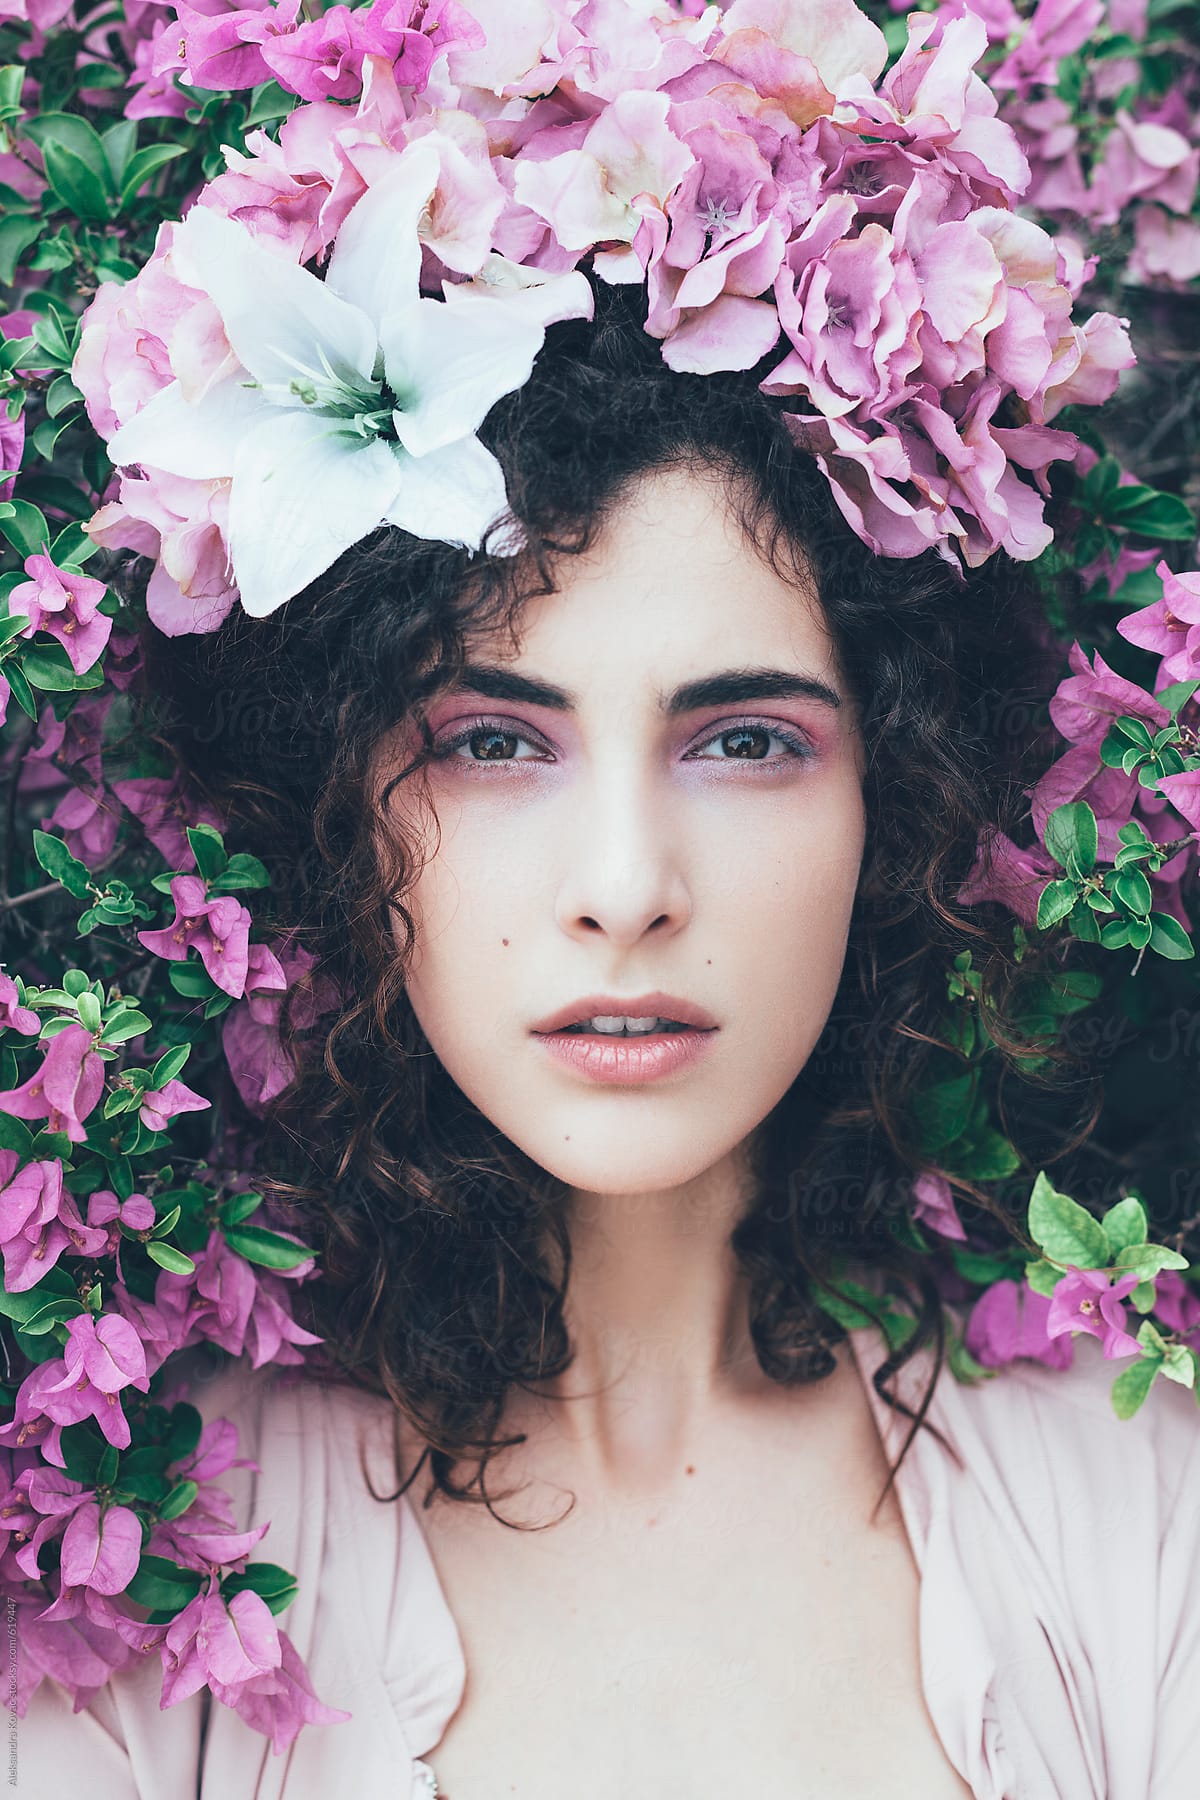 Woman beauty surrounded by pink flower arrangement.